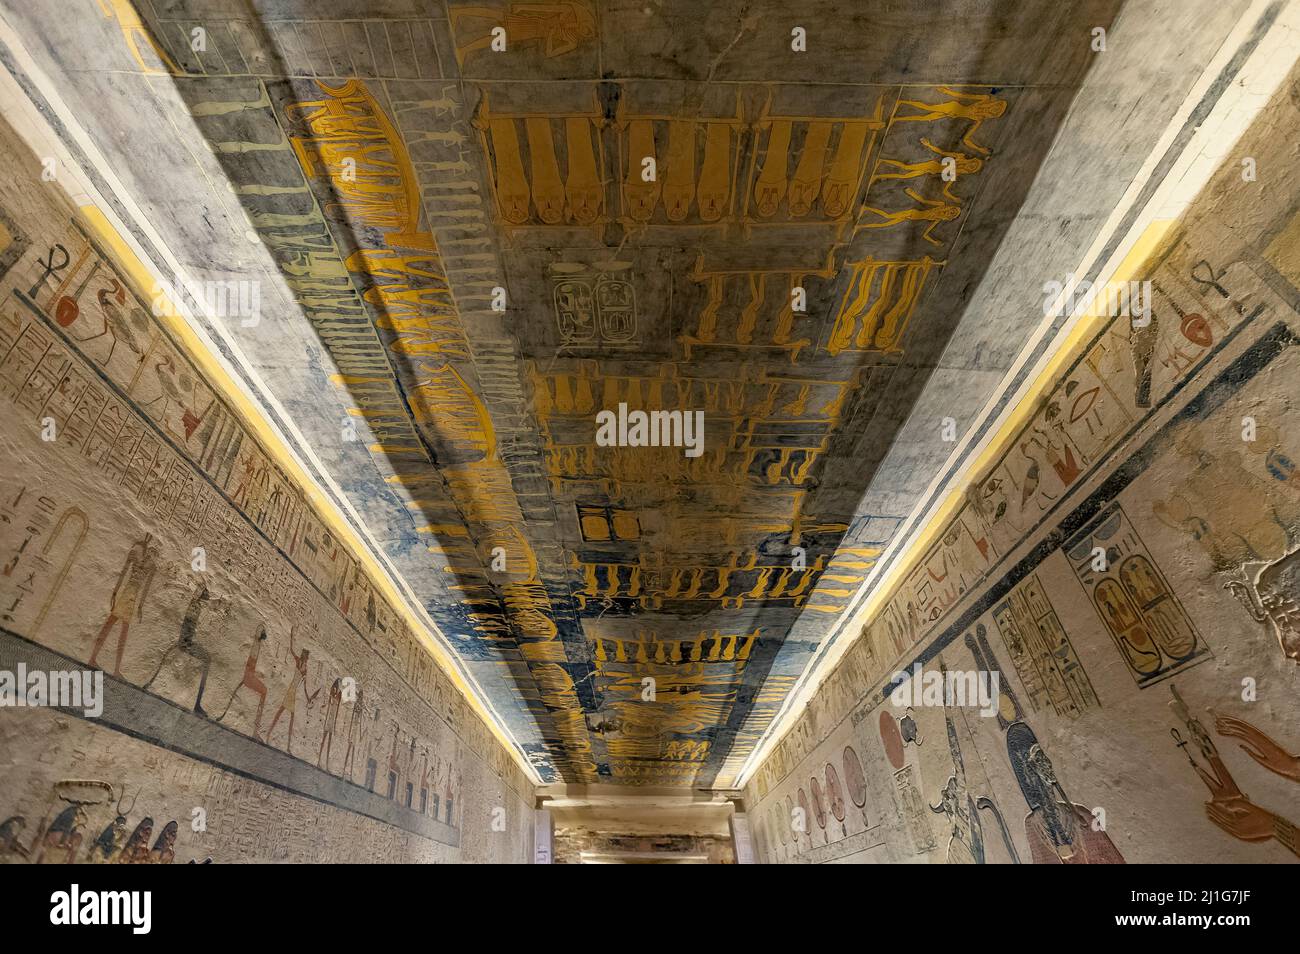 Ceiling of the tomb of Ramesses IX, KV6, in the Valley of the Kings, depicting the journey of the sun god Ra Stock Photo